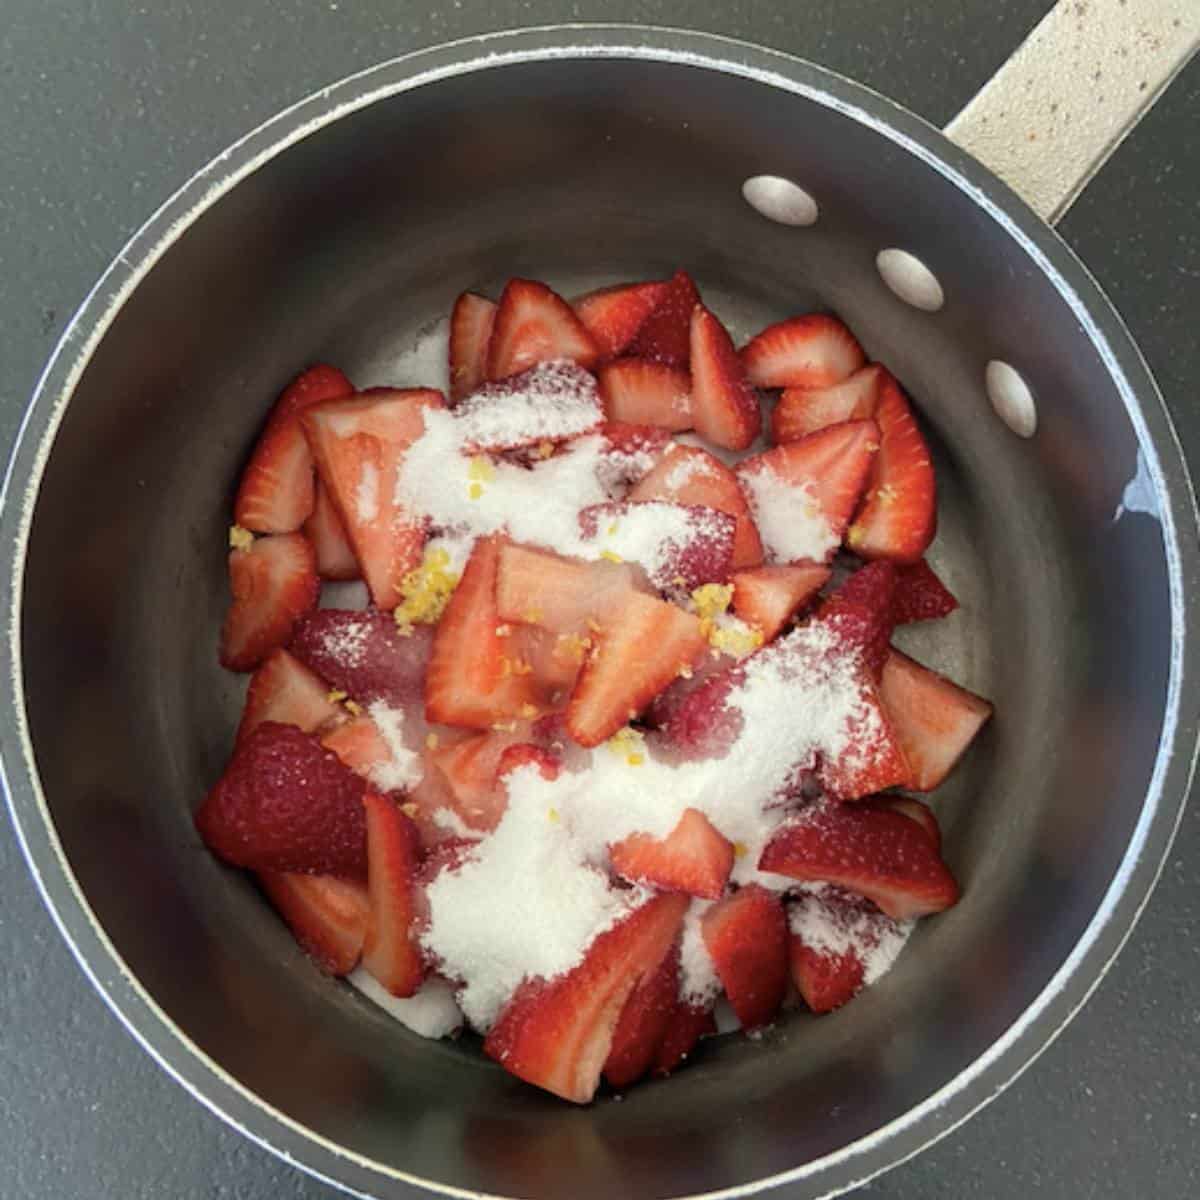 strawberry compote ingredients in saucepan